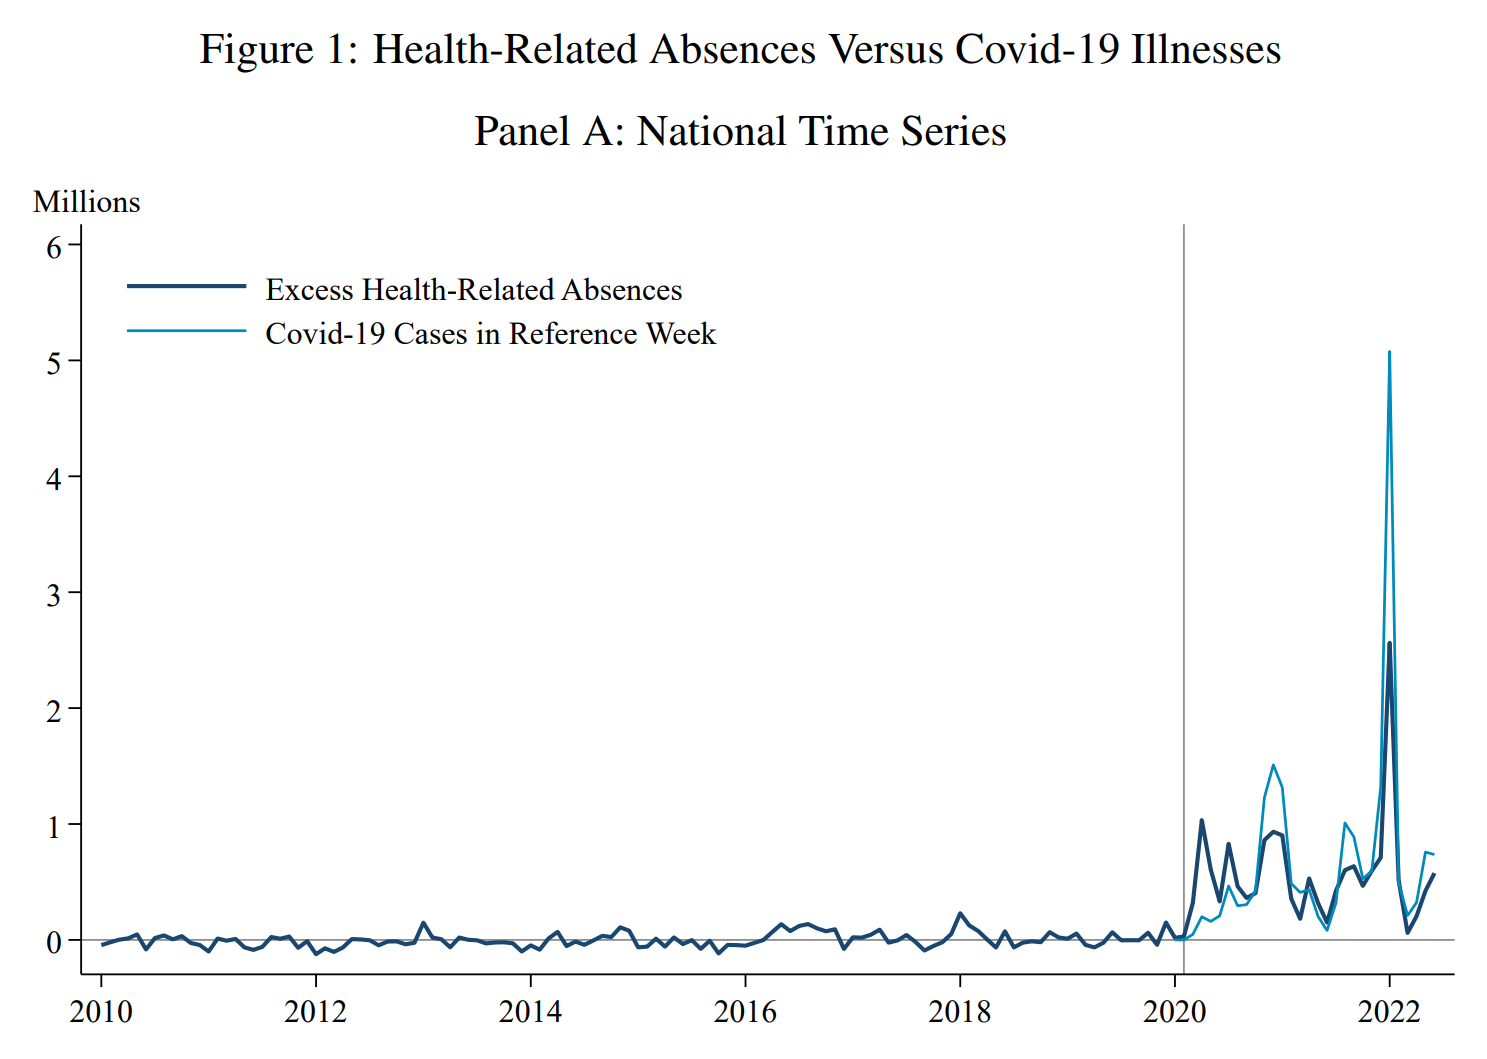 Health-related absences versus COVID-19 illnesses, 2010-2022. Covid-19 illnesses have likely become, over the last two years, an important contributor to the net change in the participation rate. By June 2022, Covid-19 illnesses reduced the participation rate by 0.18 percentage points, with a range of 0.13 to 0.22 percentage points. These reductions in the participation rate imply that approximately 500,000 adults are neither working nor actively looking for work due to the persistent effects of Covid-19 illnesses, with a range of 340,000 to 590,000 adults. This point-in-time participation-rate loss is near the steady-state loss associated with the 2021-average rate of health-related absences. That is, if the health-related absence rate remains near its 2021 level, and if the impacts of Covid-19 absences are unchanged, then our estimates suggest the participation rate will be persistently reduced by approximately 0.2 percentage points. Graphic: Goda and Soltas, 2022 / NBER